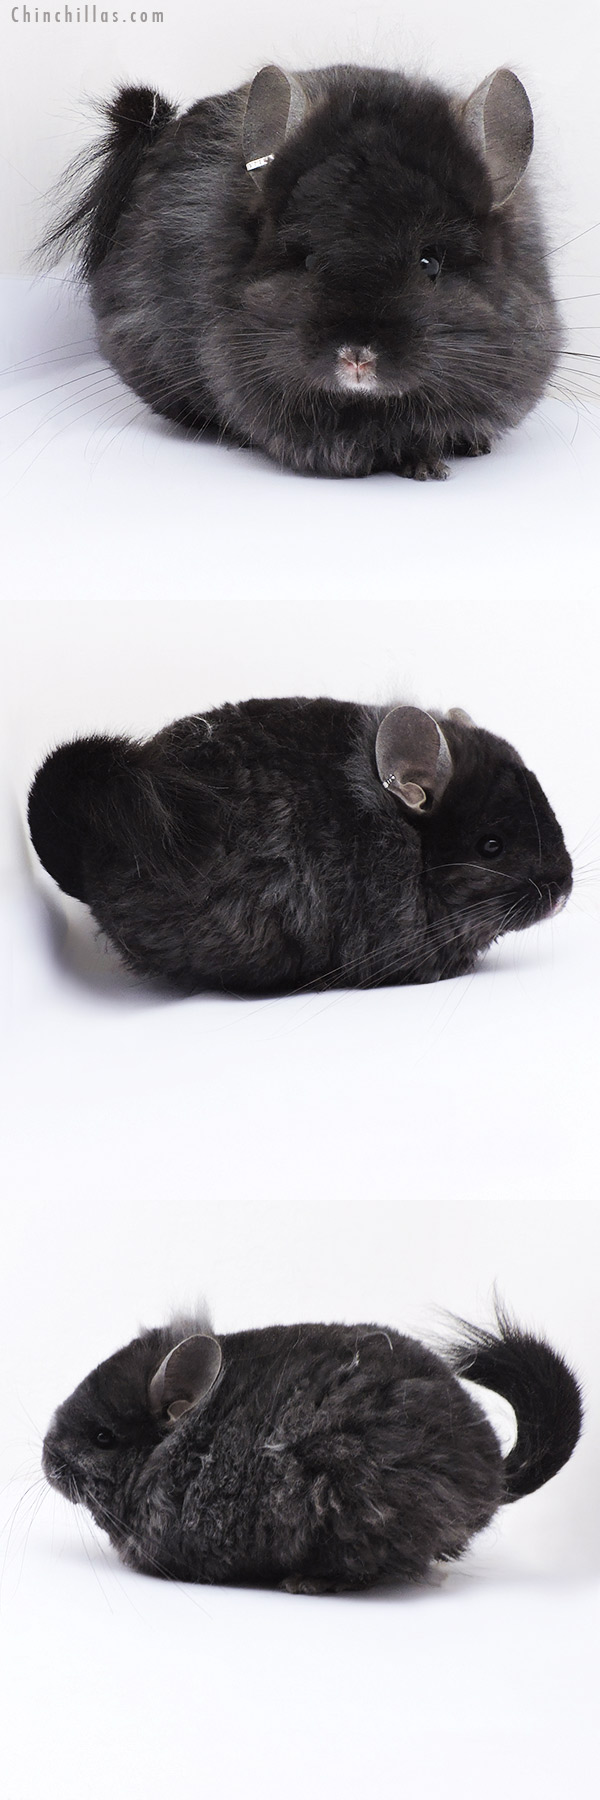 Chinchilla or related item offered for sale or export on Chinchillas.com - 19065 Exceptional Ebony Quasi Locken G2  Royal Persian Angora Female Chinchilla with Lion Mane